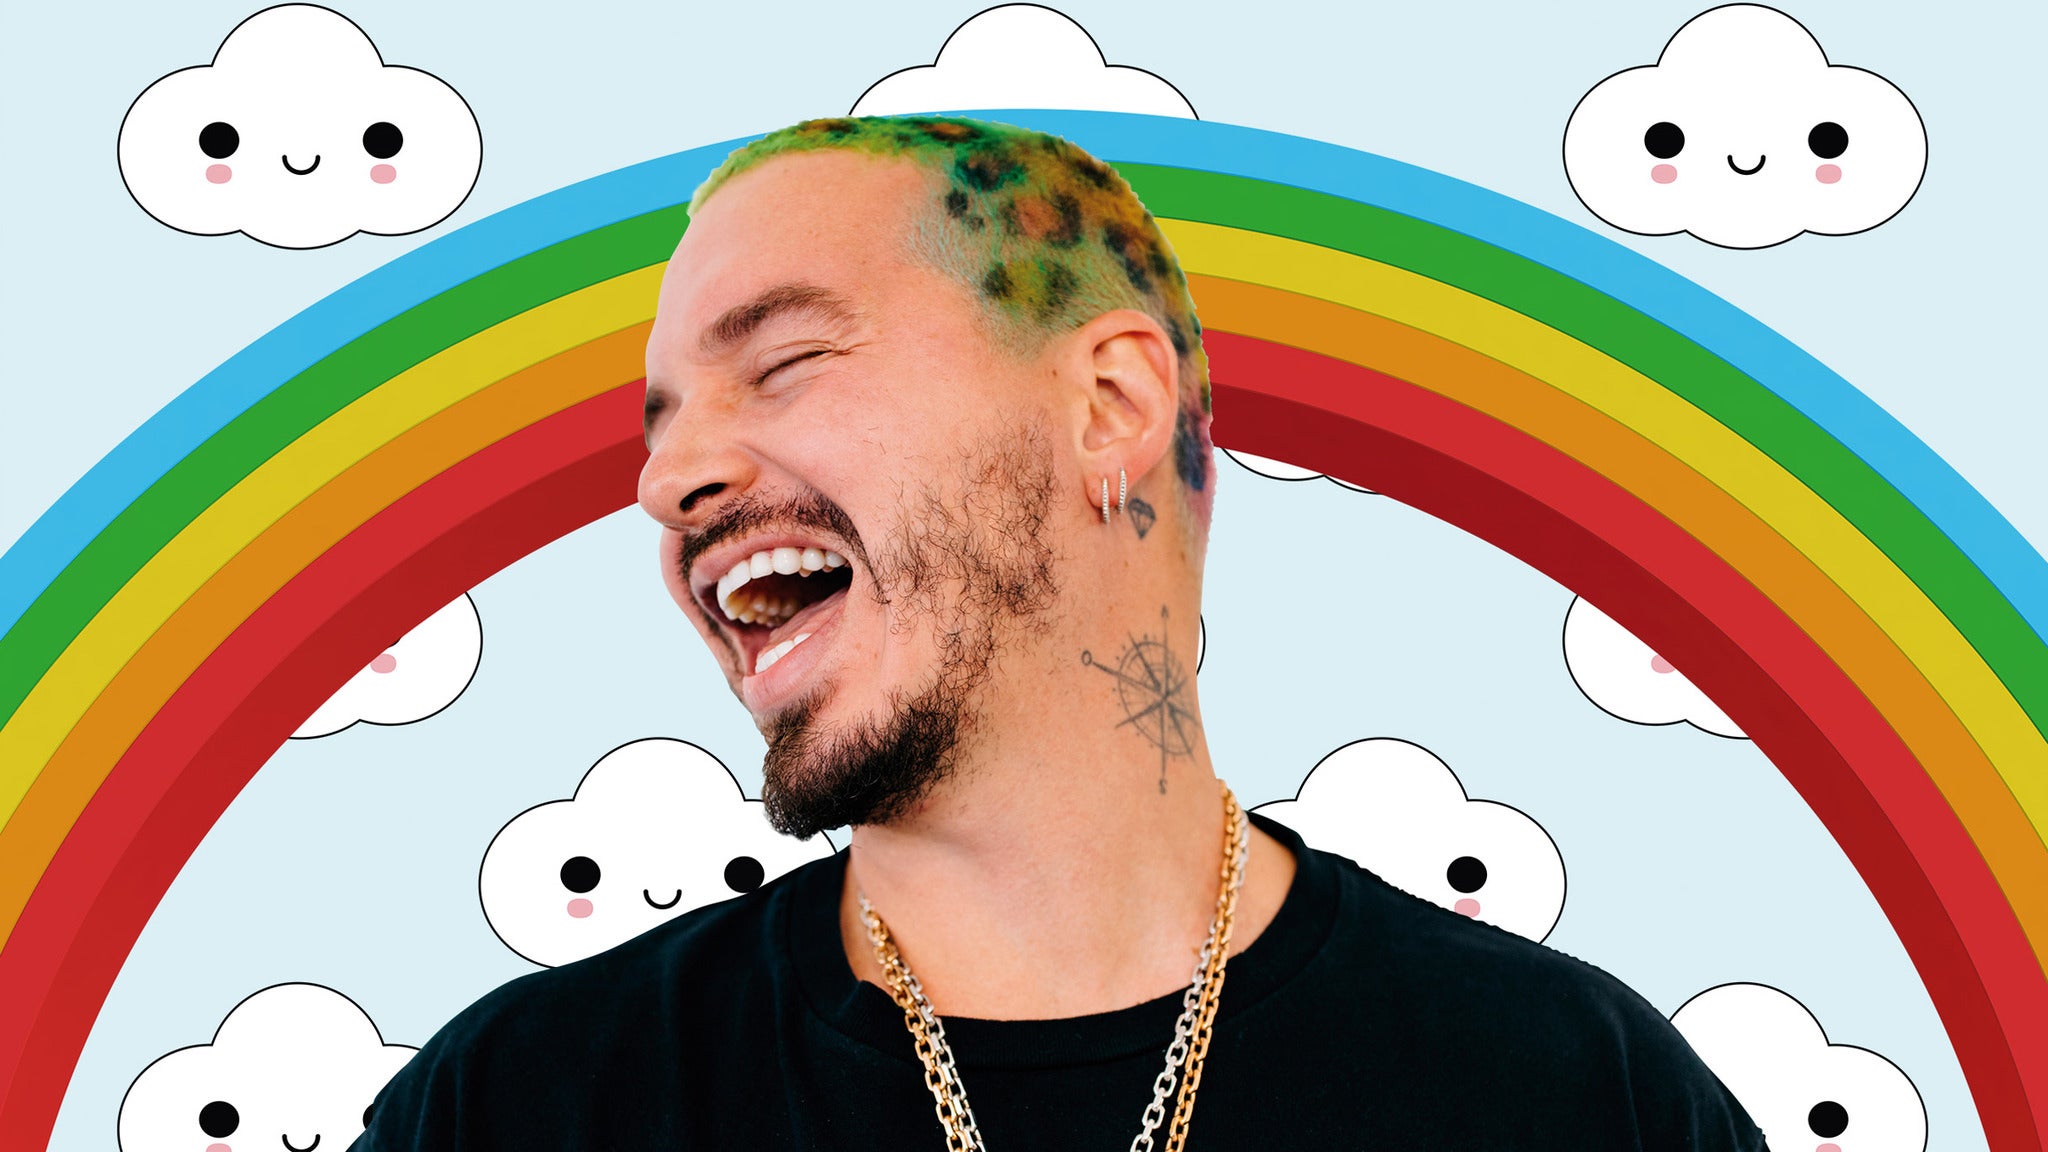 J Balvin Vibras Tour in Tampa promo photo for VIP Package presale offer code